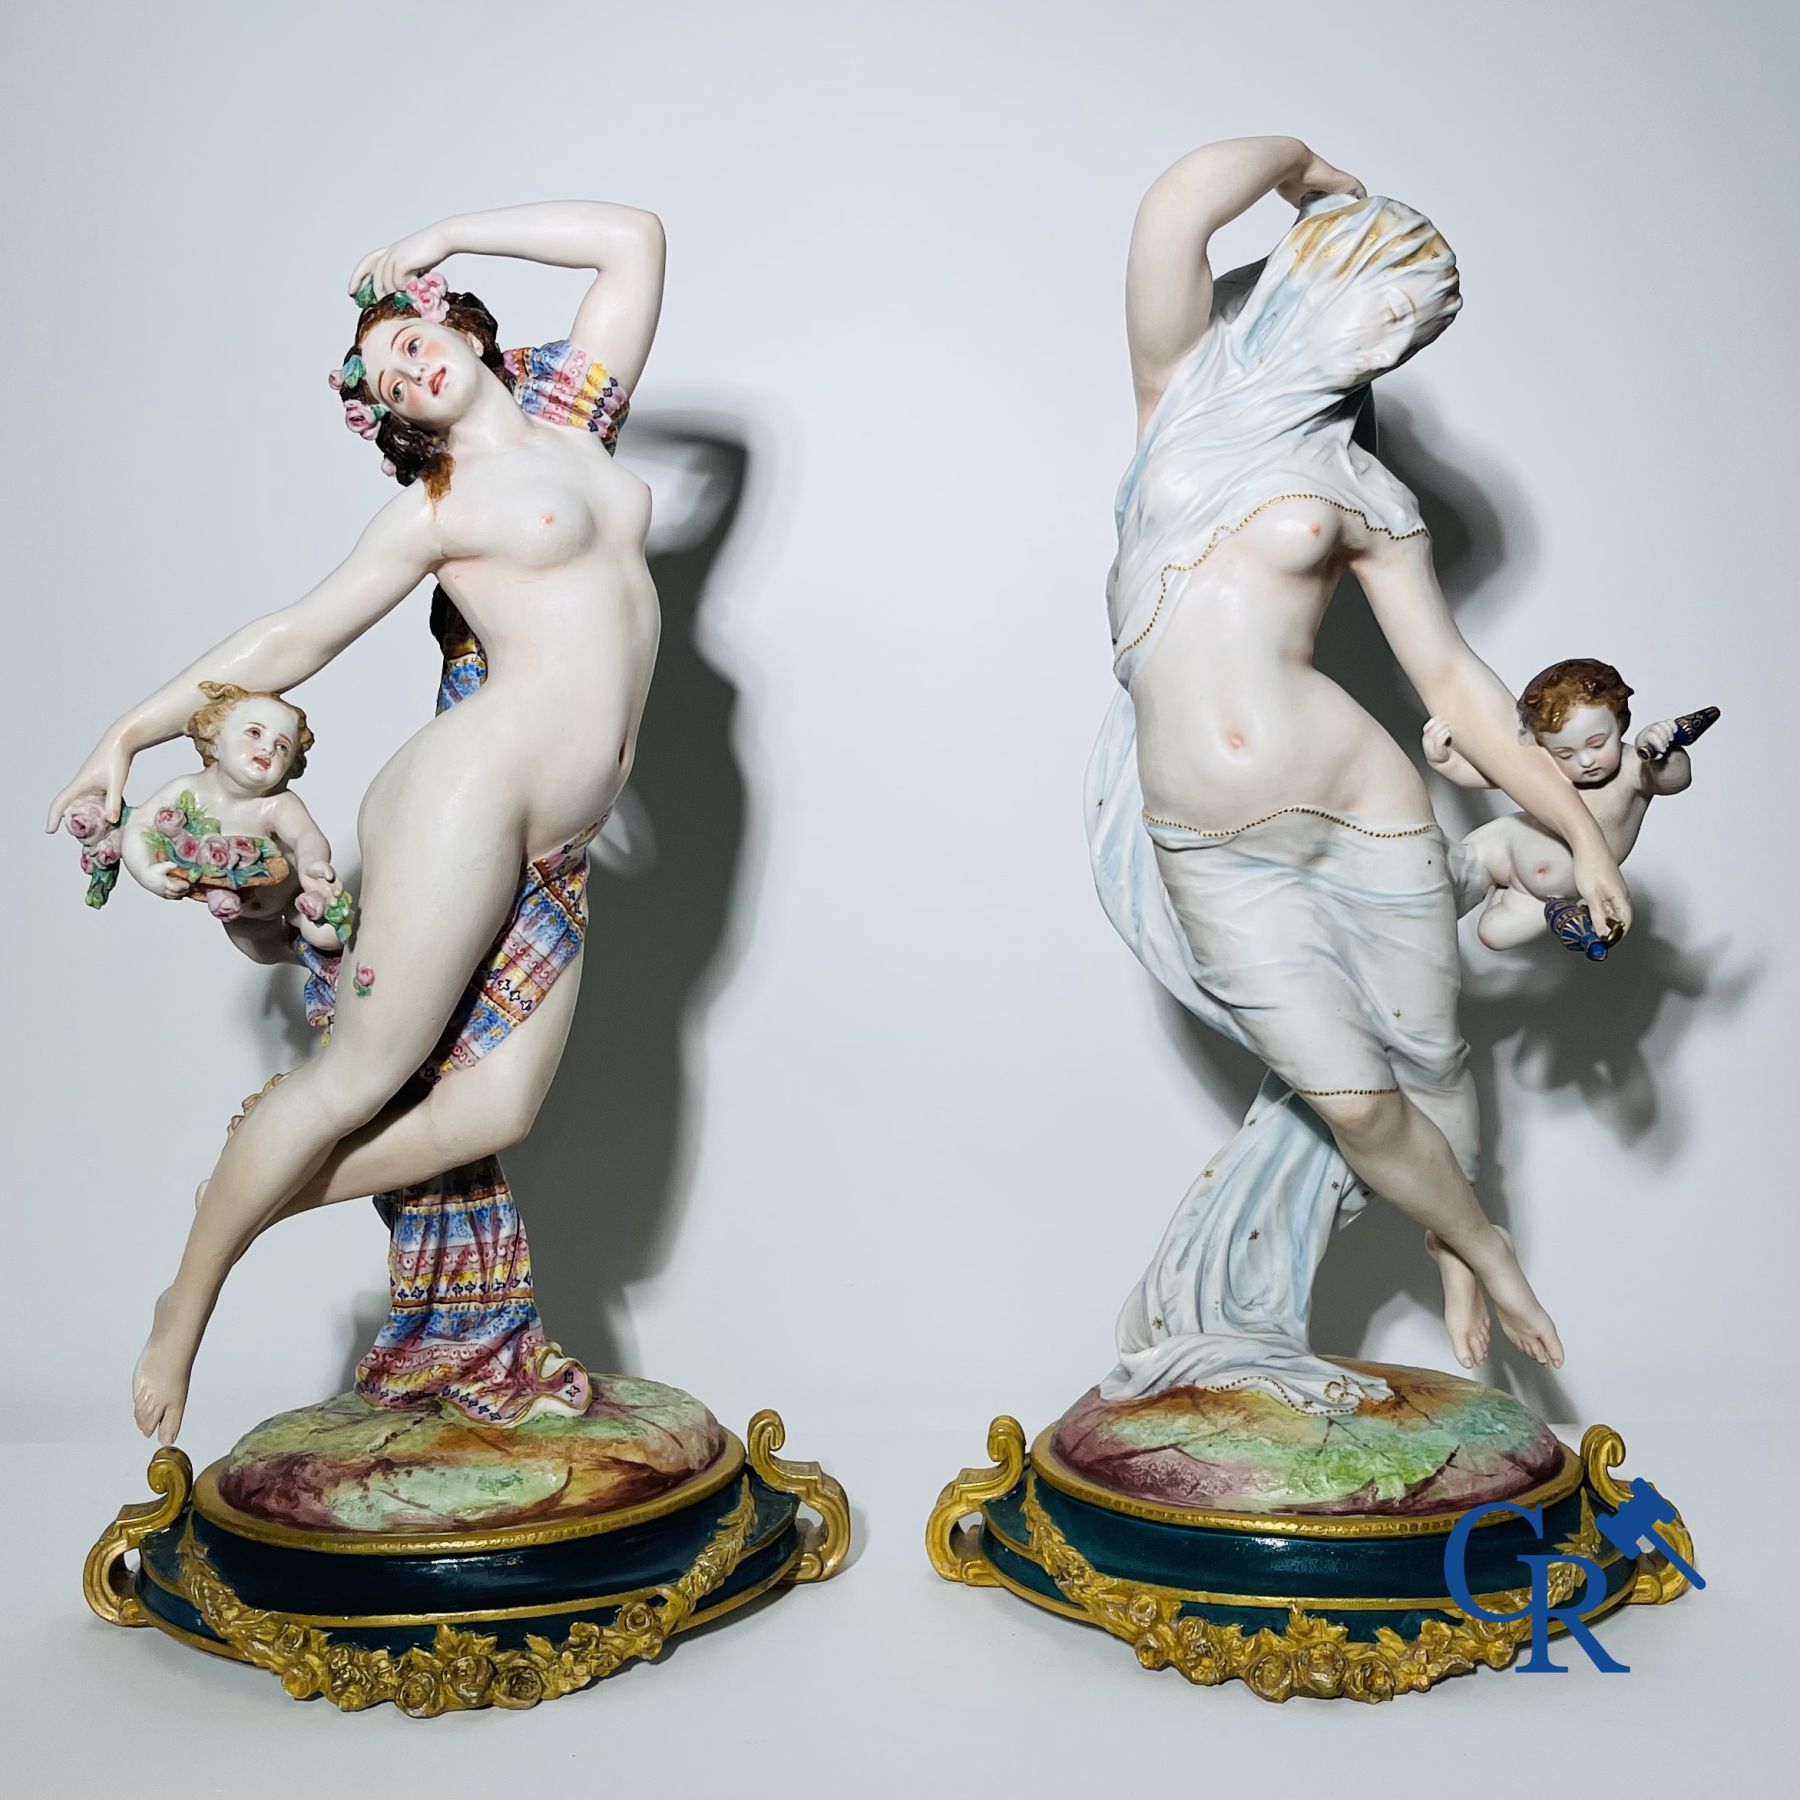 Porcelain: Large pair of multi-coloured decorated and gilded statues in biscuit with the representation of "Day and Night".